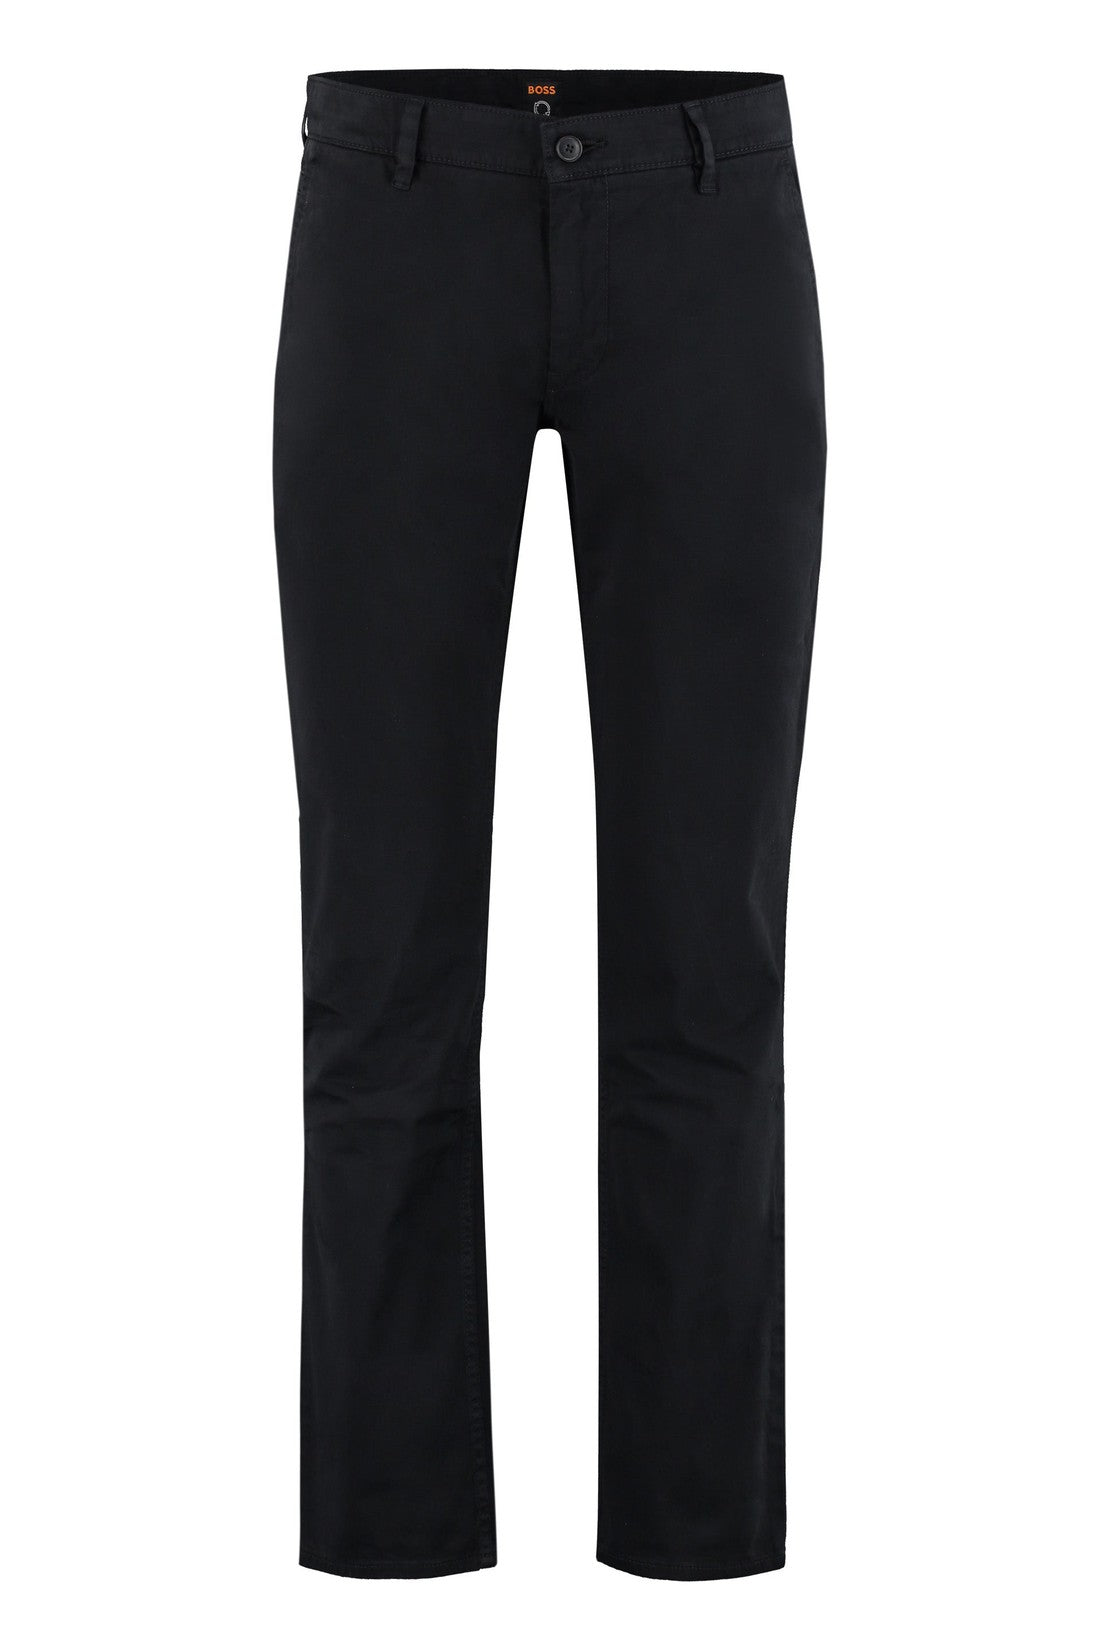 BOSS-OUTLET-SALE-Cotton Chino trousers-ARCHIVIST